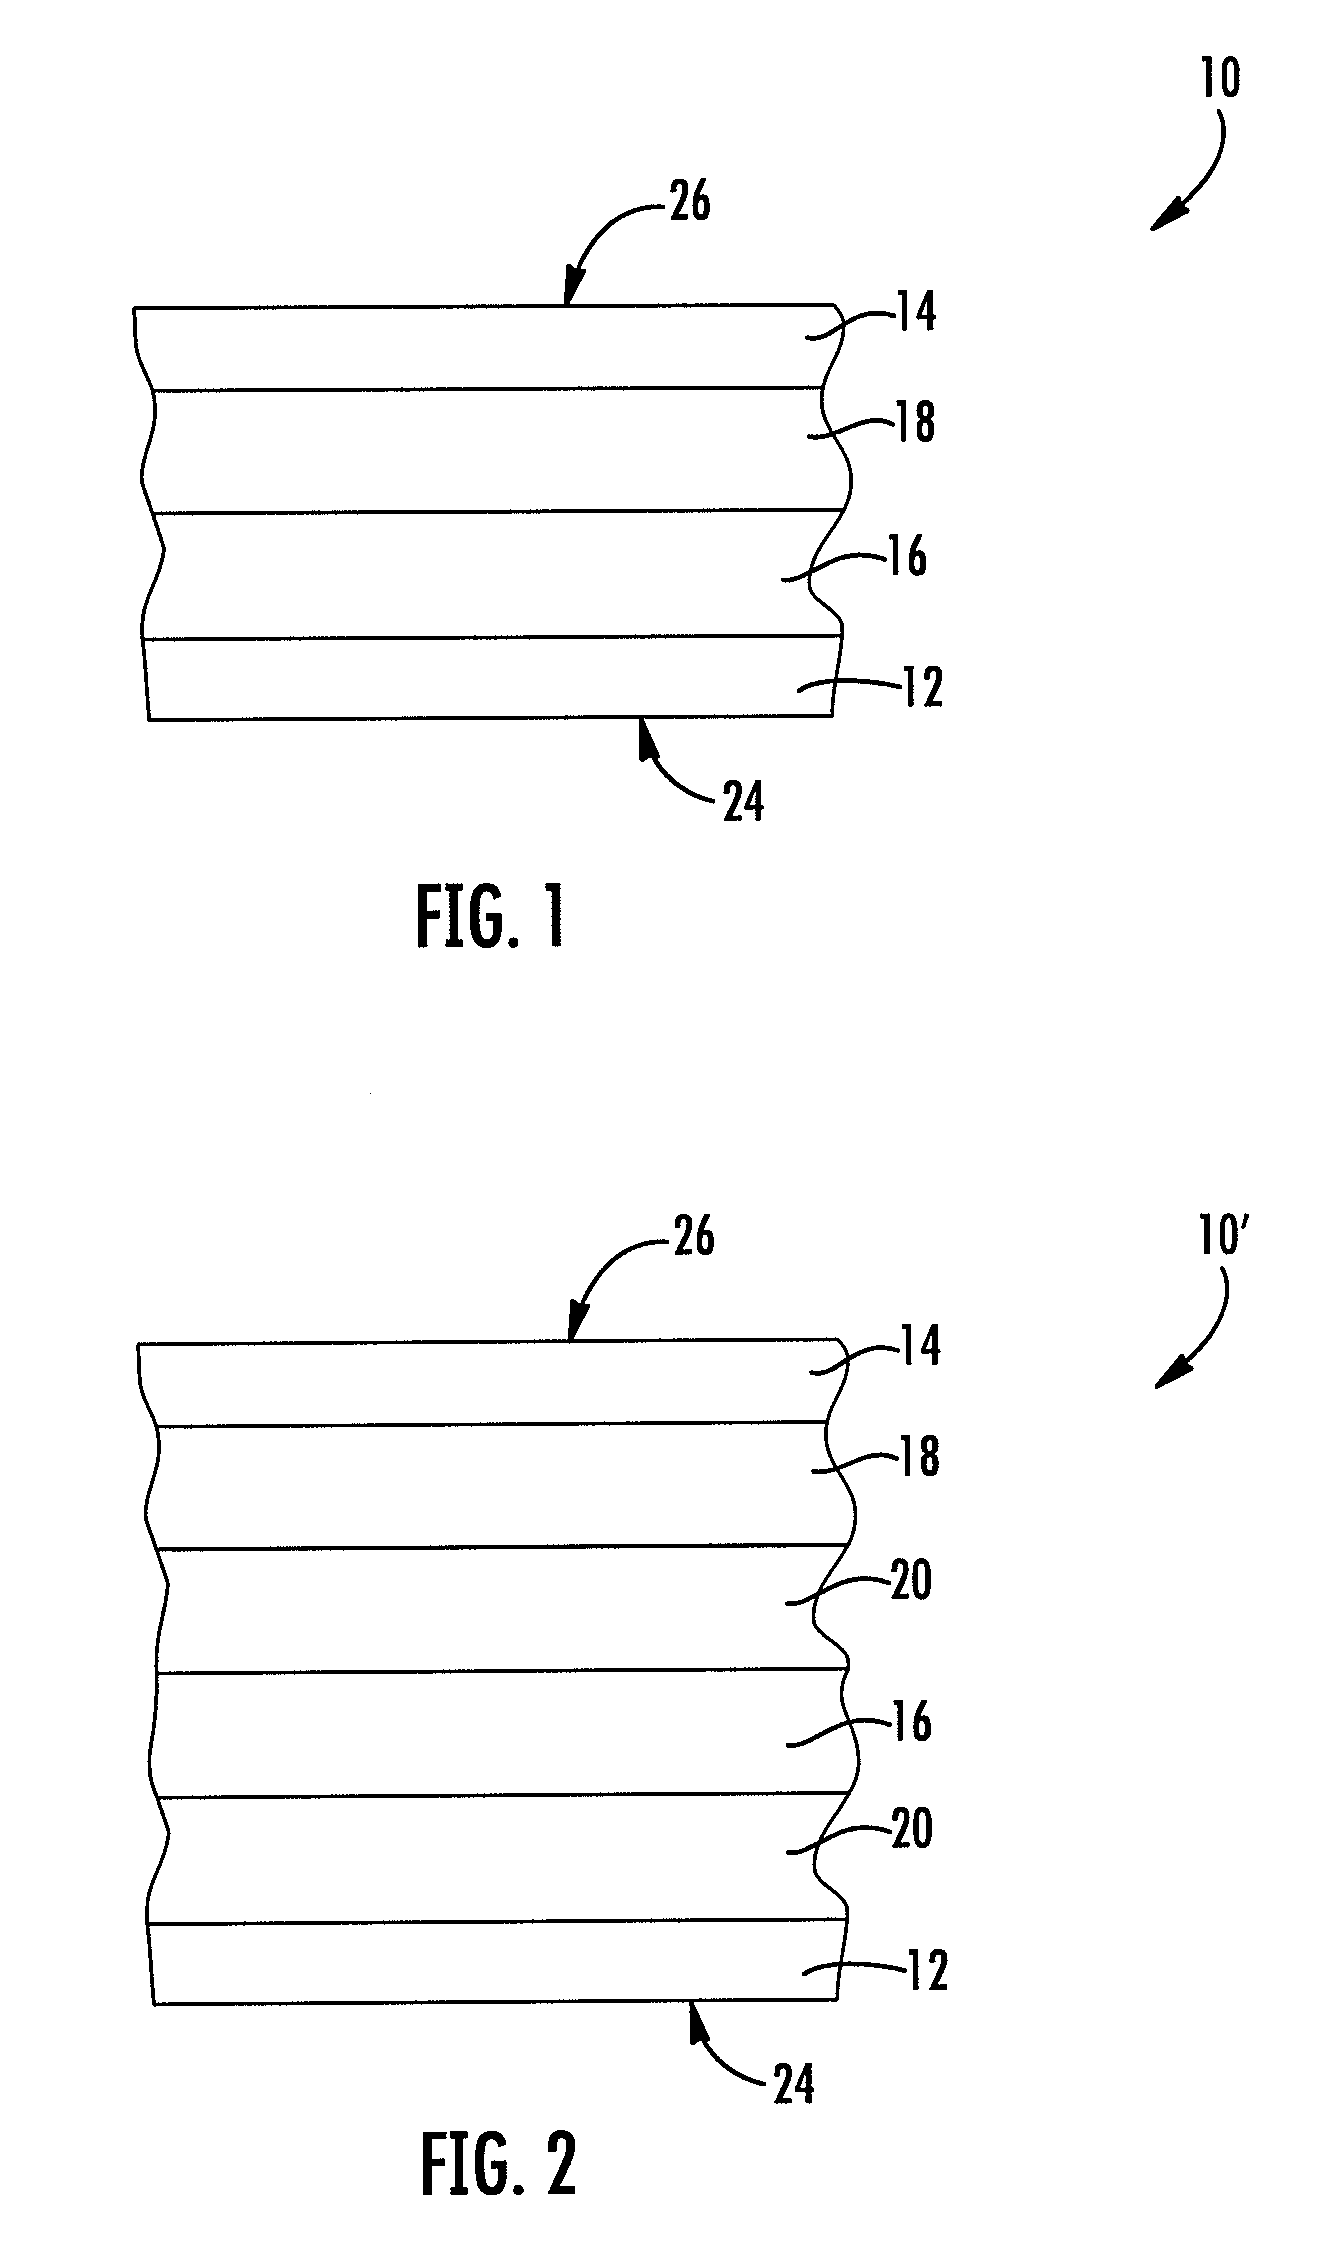 Multilayer Film Having Active Oxygen Barrier Layer and Iron-Based Oxygen Scavenging Layer